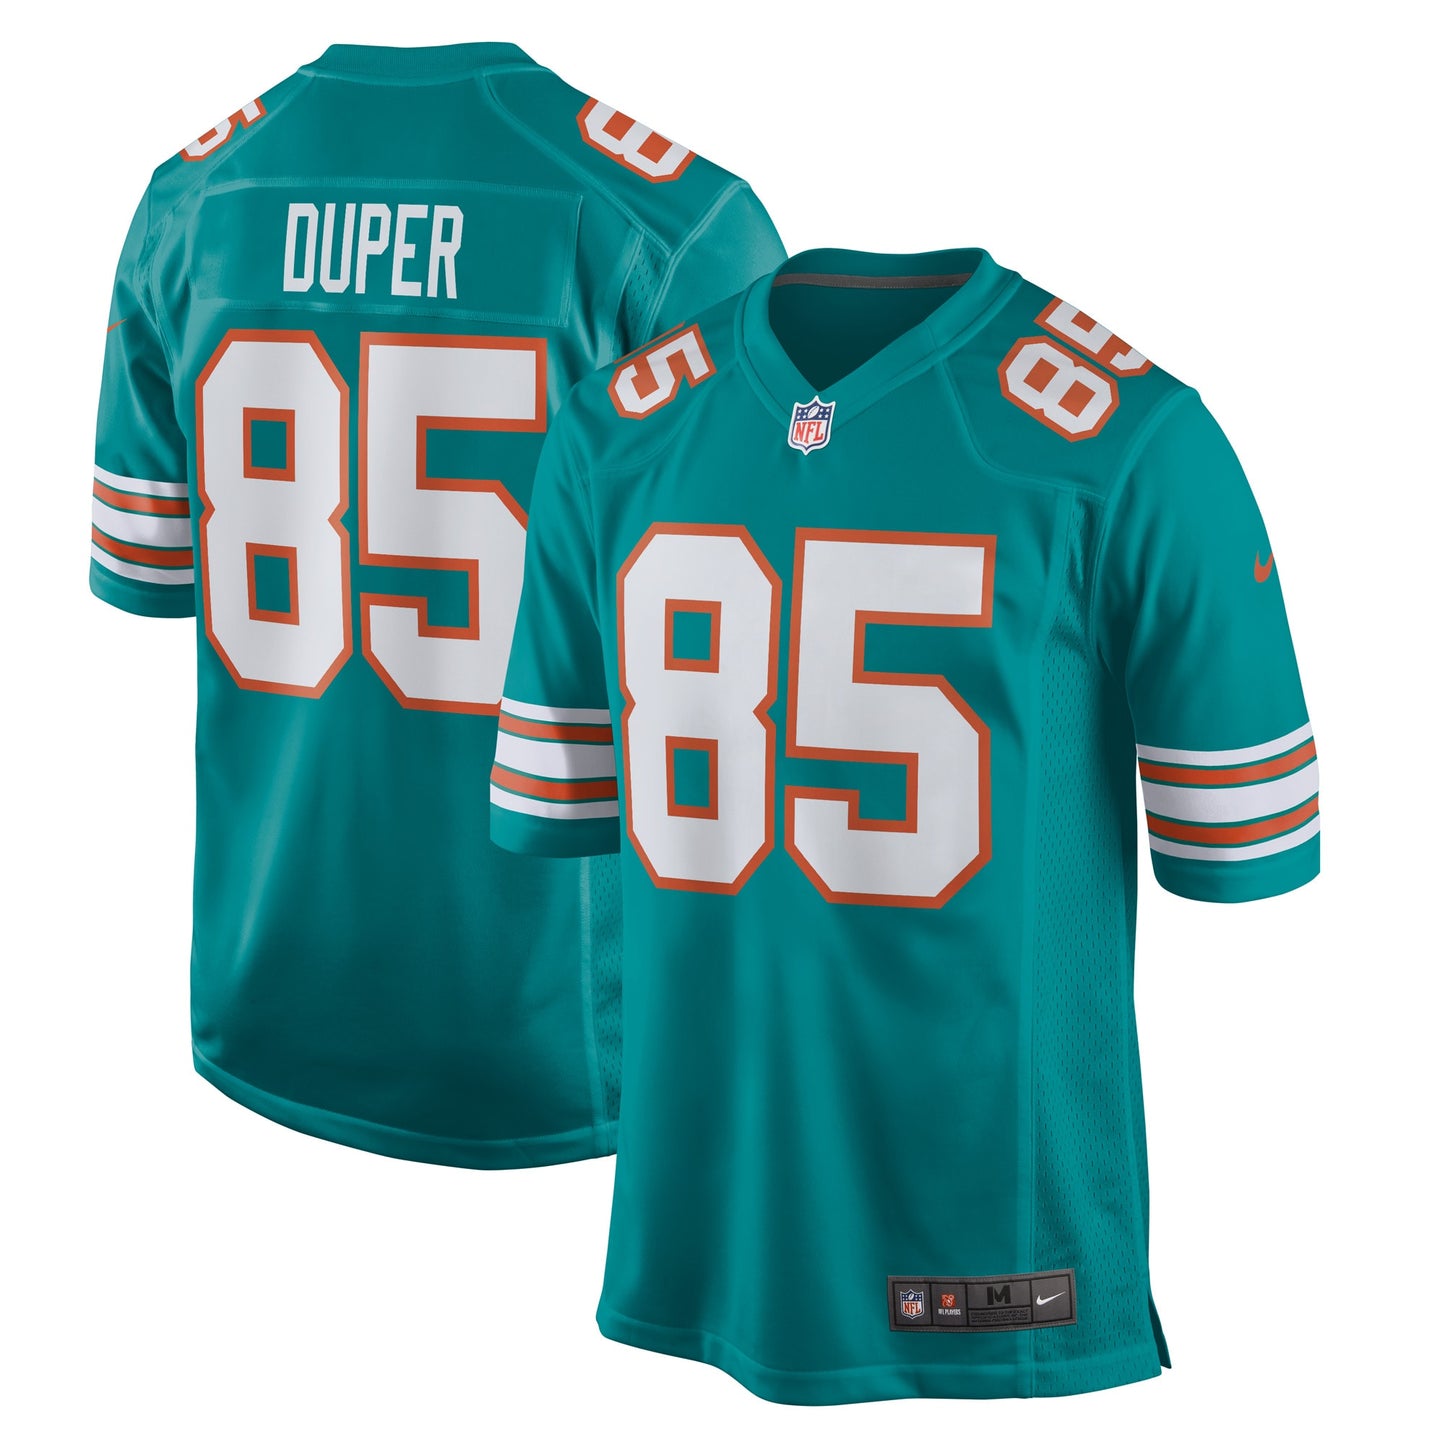 Mark Duper Miami Dolphins Nike Retired Player Jersey - Aqua